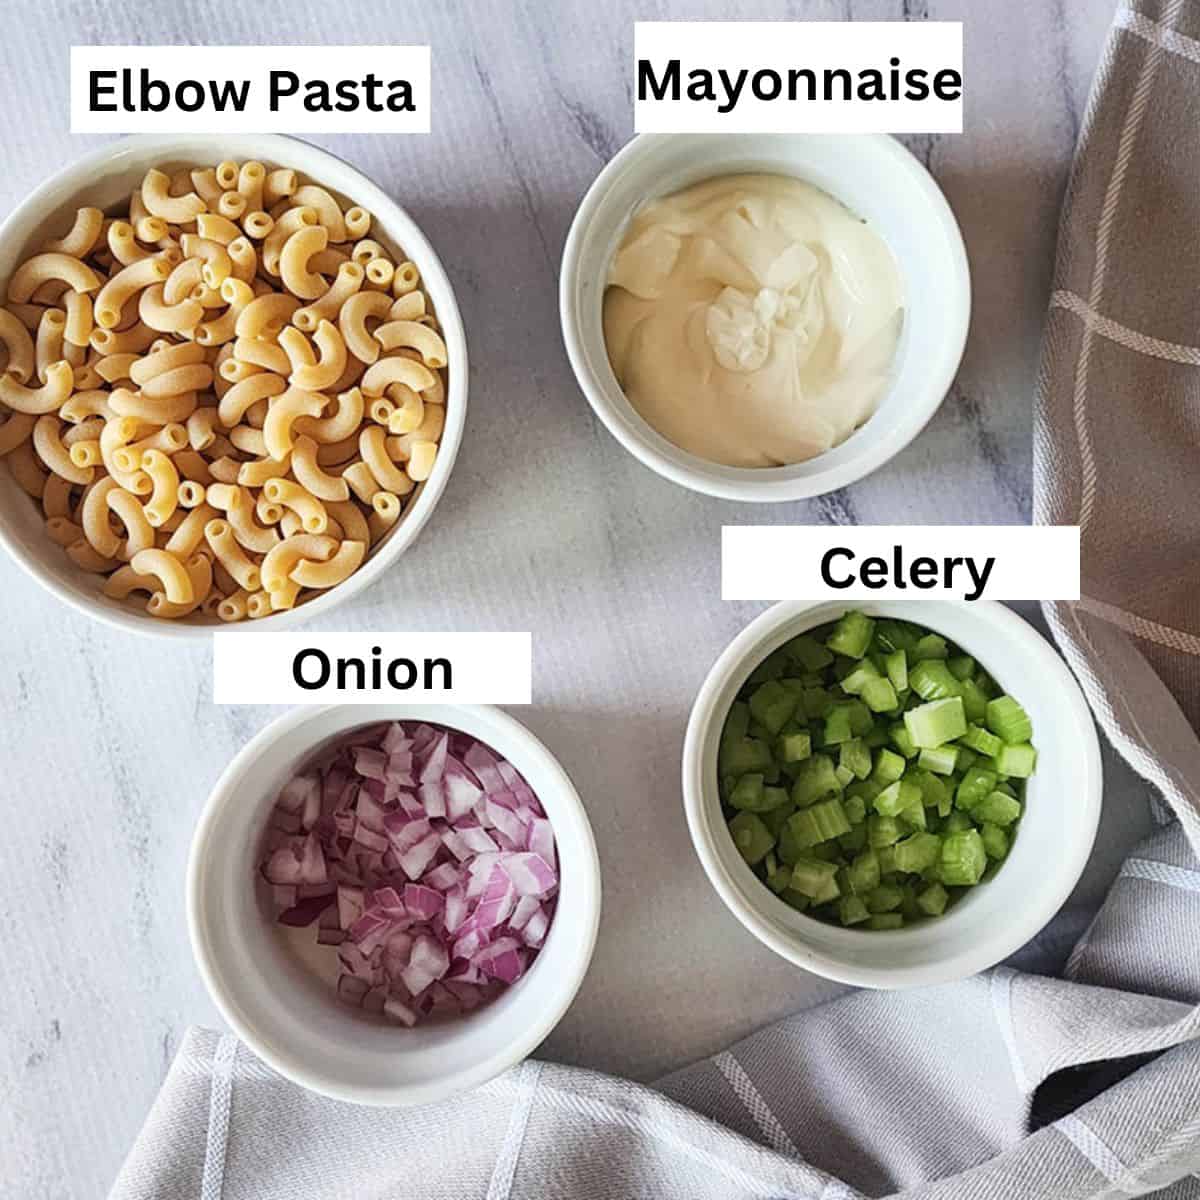 a picture of macaroni salad ingredients